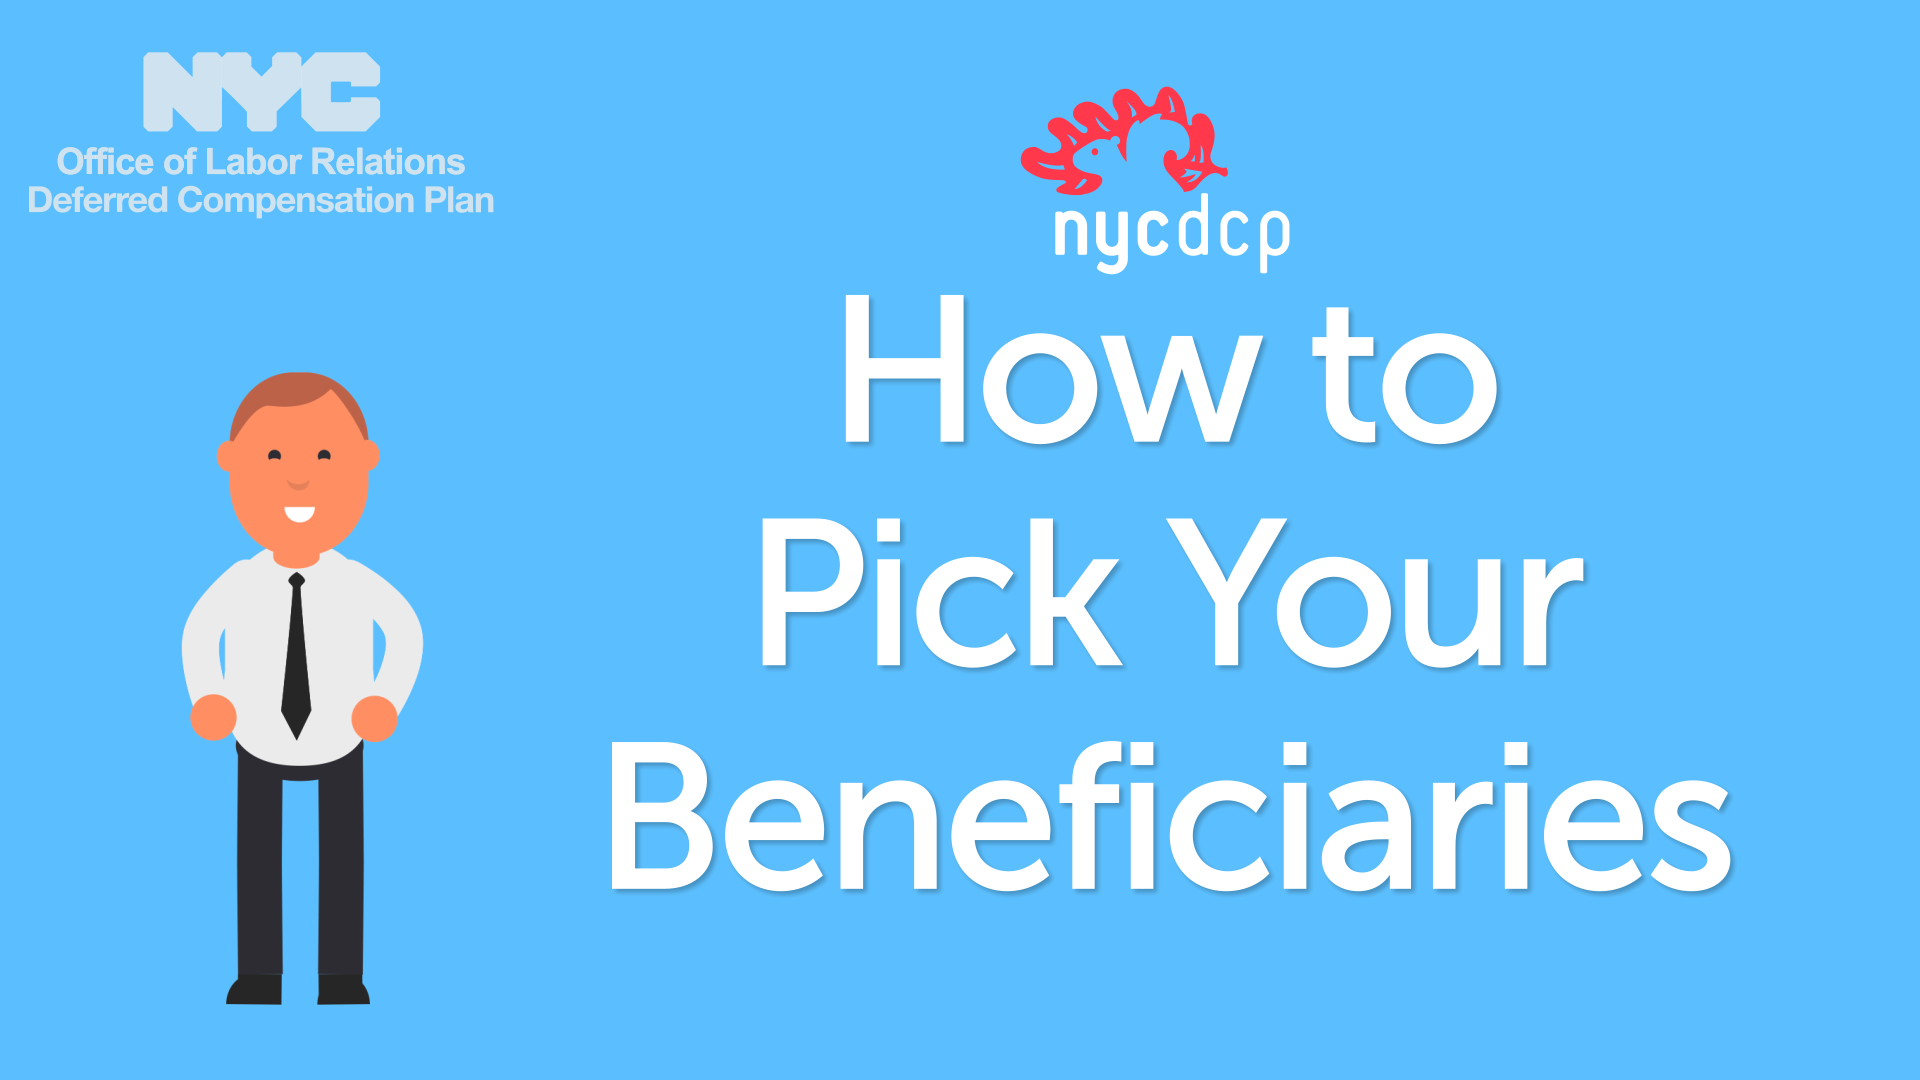 Character next to the words "How to Pick Your Beneficiaries"